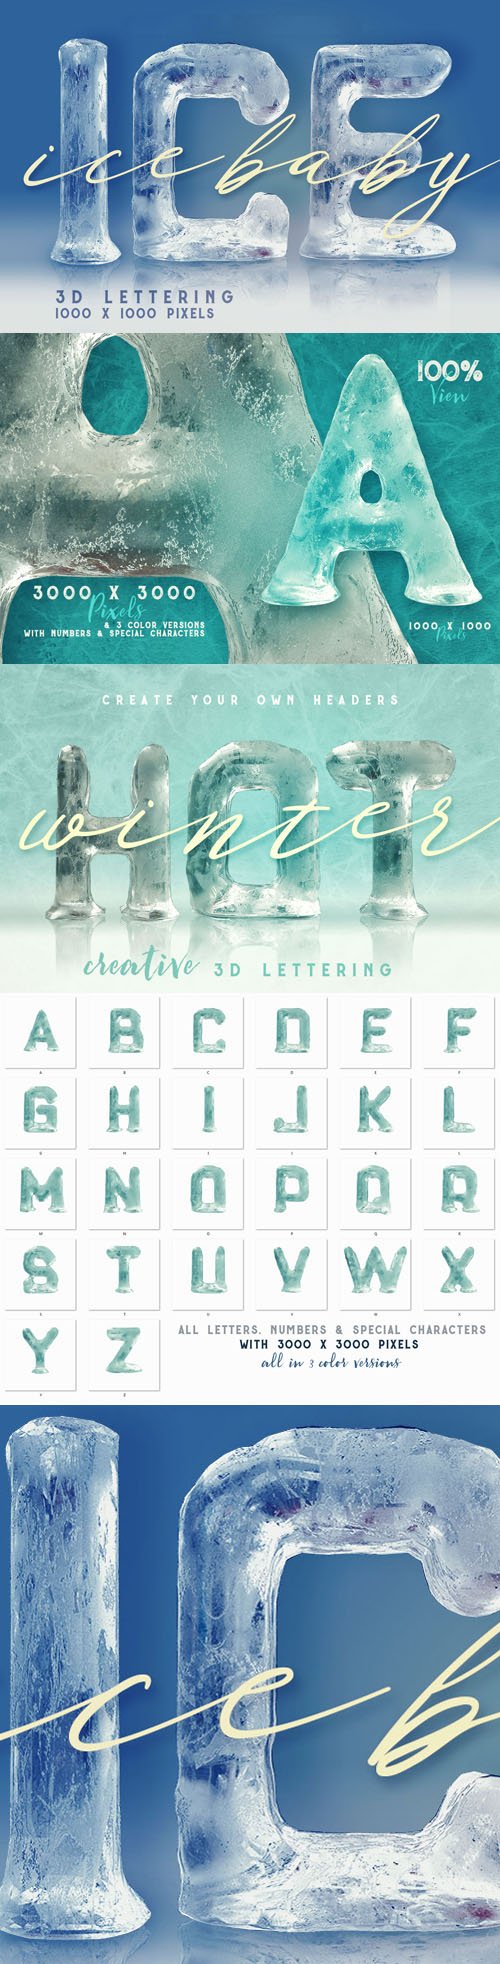 Ice Baby 3D Lettering Renders A-Z